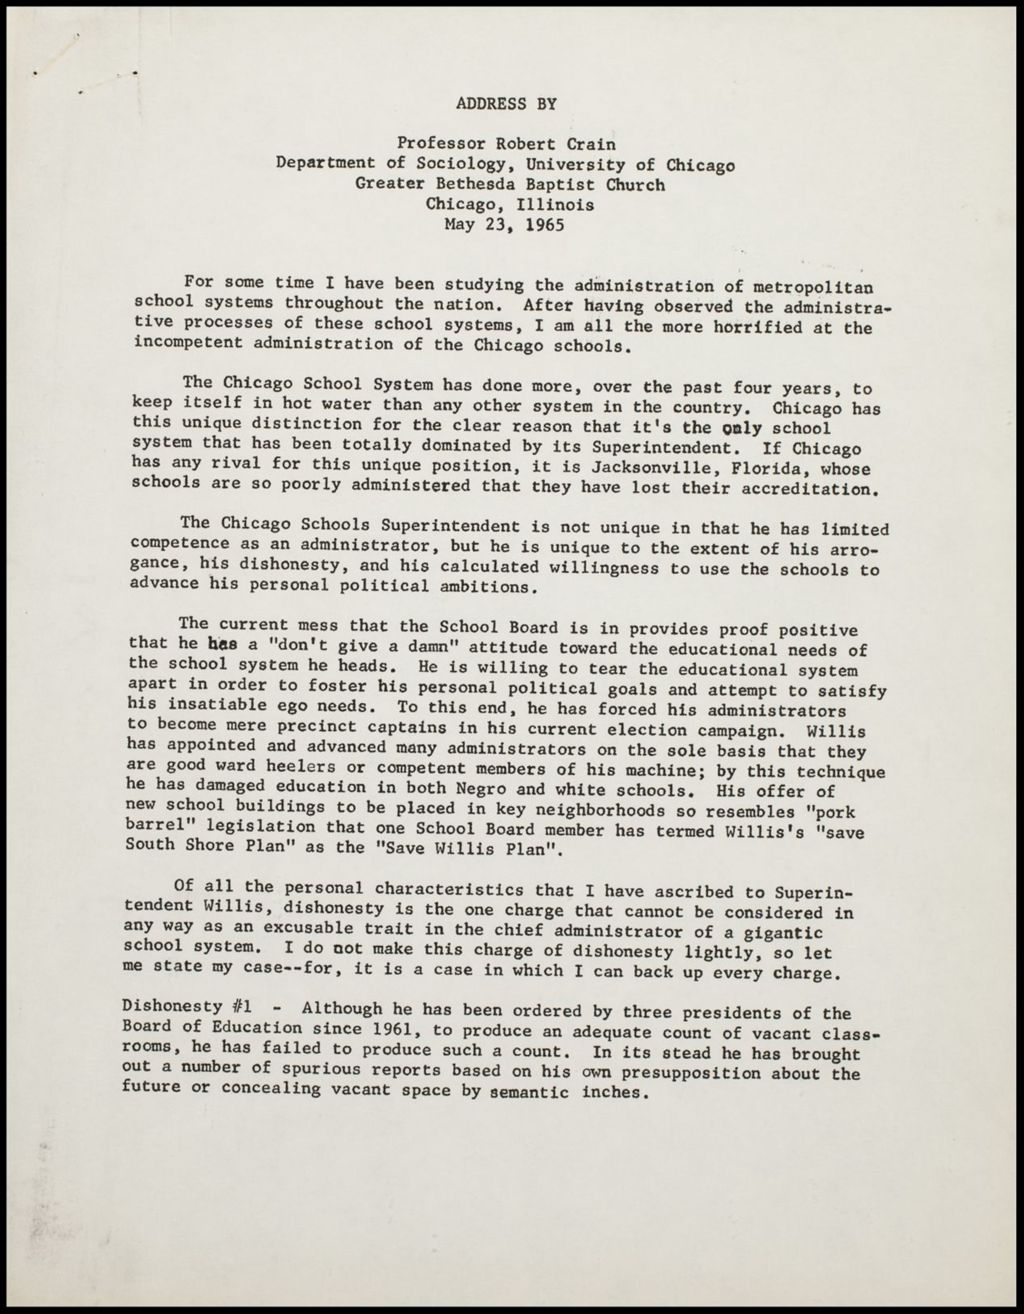 Papers on Policy Making, 1964 (Folder III-2471)